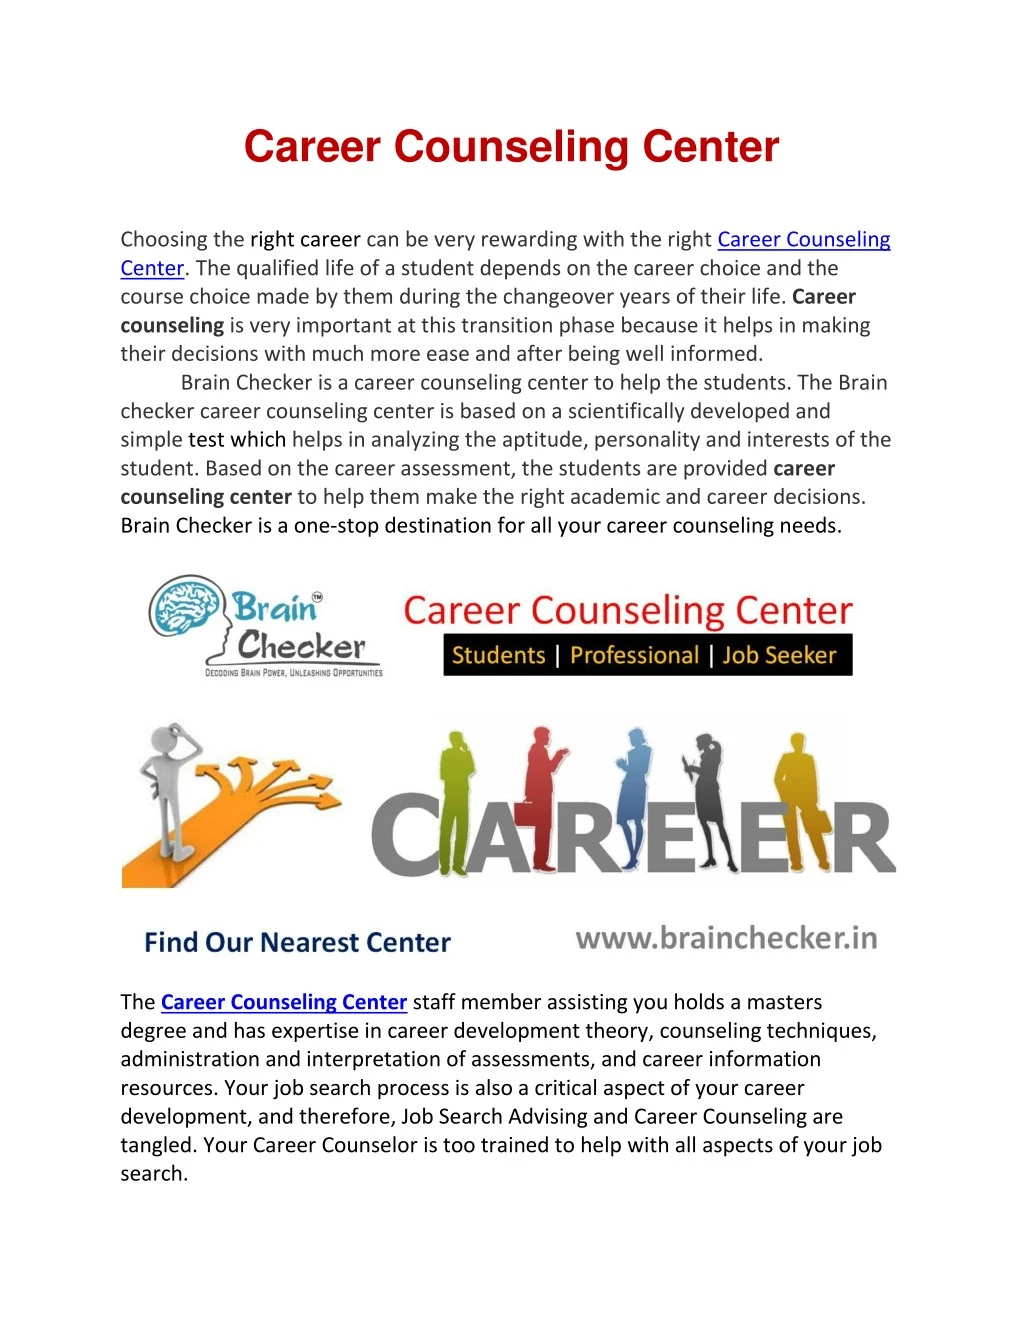 career counseling center choosing the right